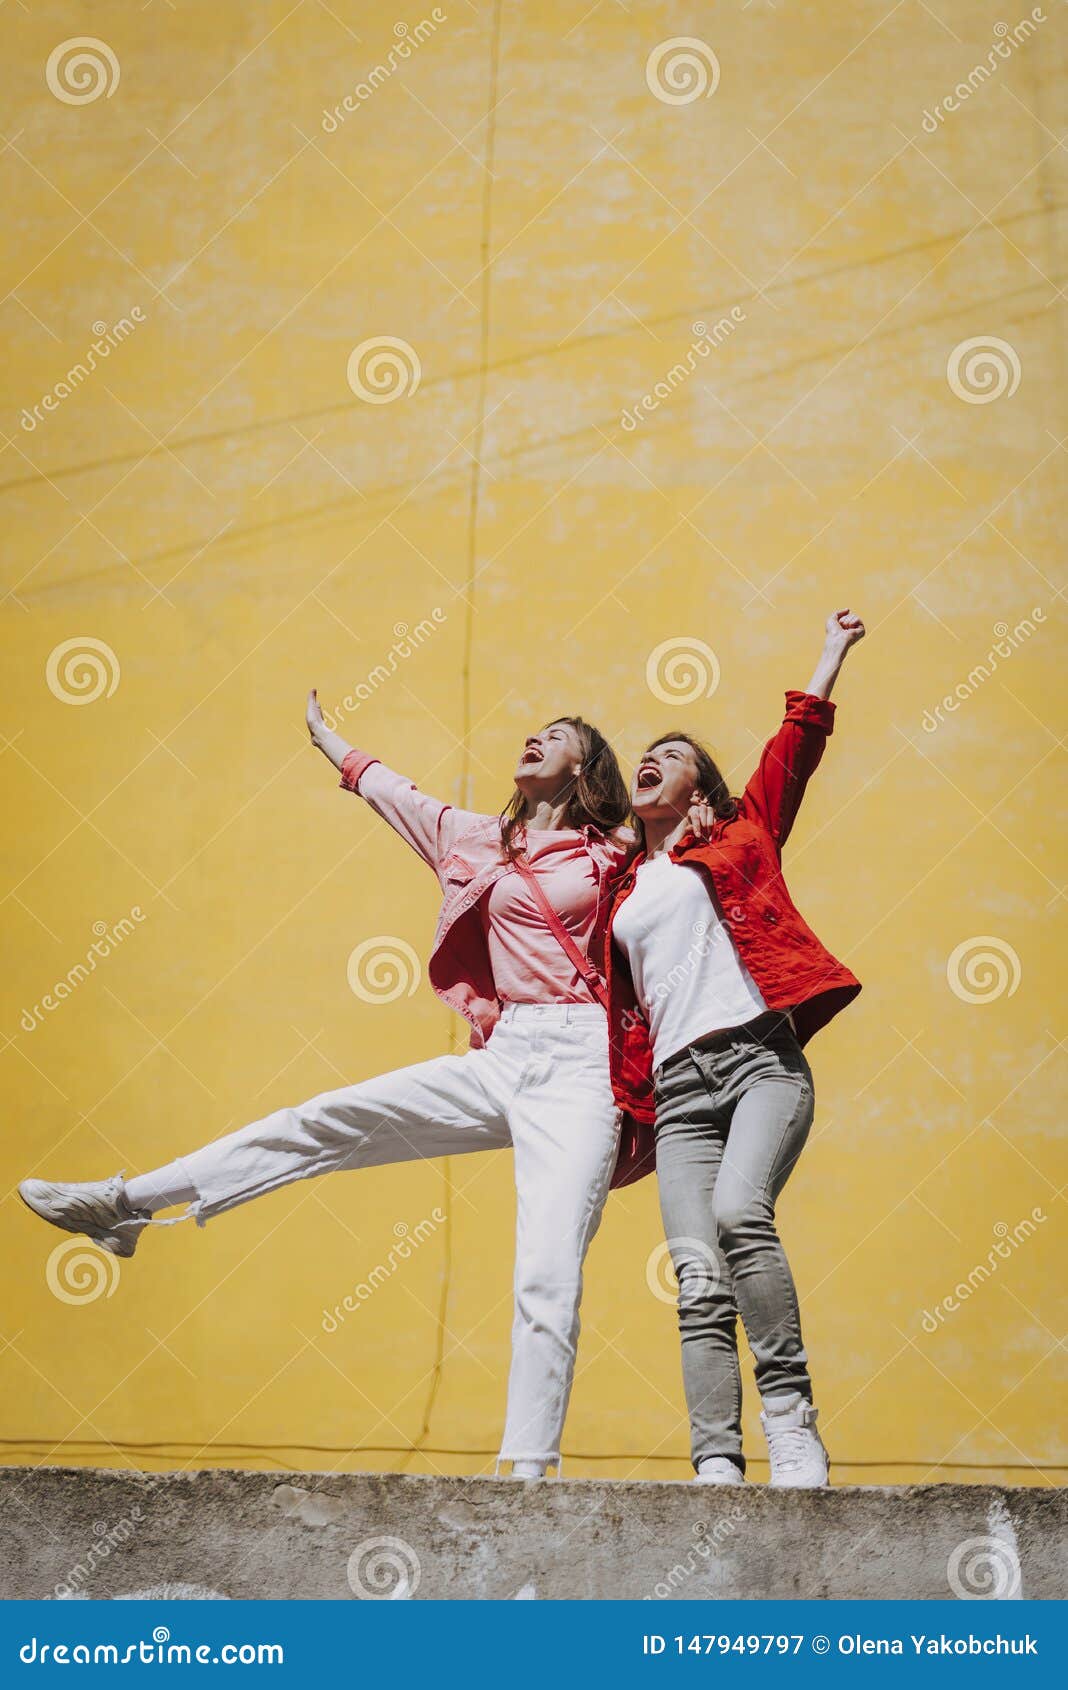 Two Pretty Cheerful Hipster Girls Enjoying Life Stock Image - Image of ...